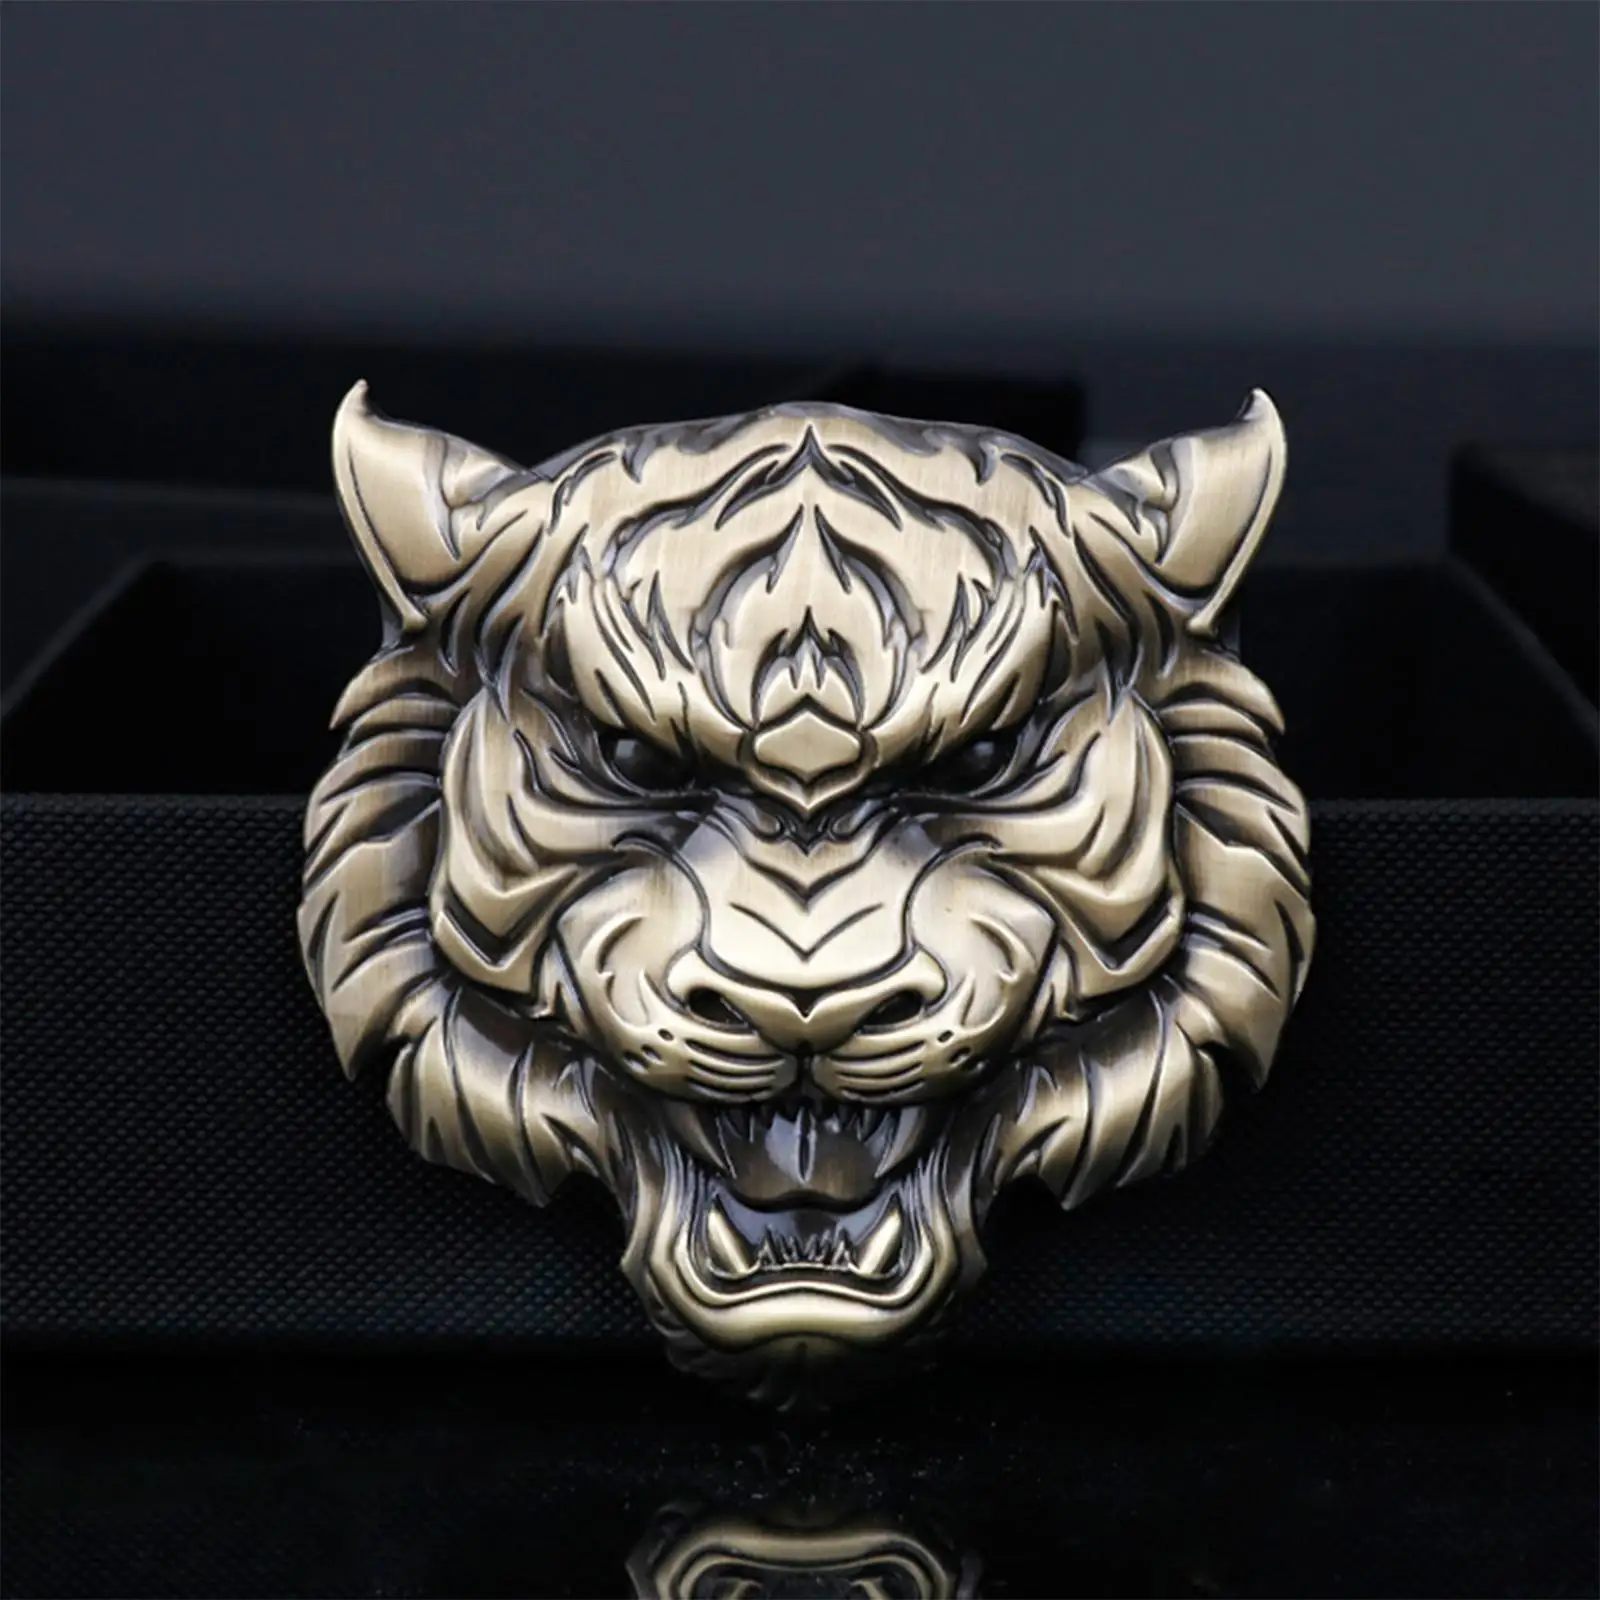 Tiger Face Auto Sticker Decal 3D Styling Metal Body Decor Label for Window Side Vehicles Truck Motorcycle